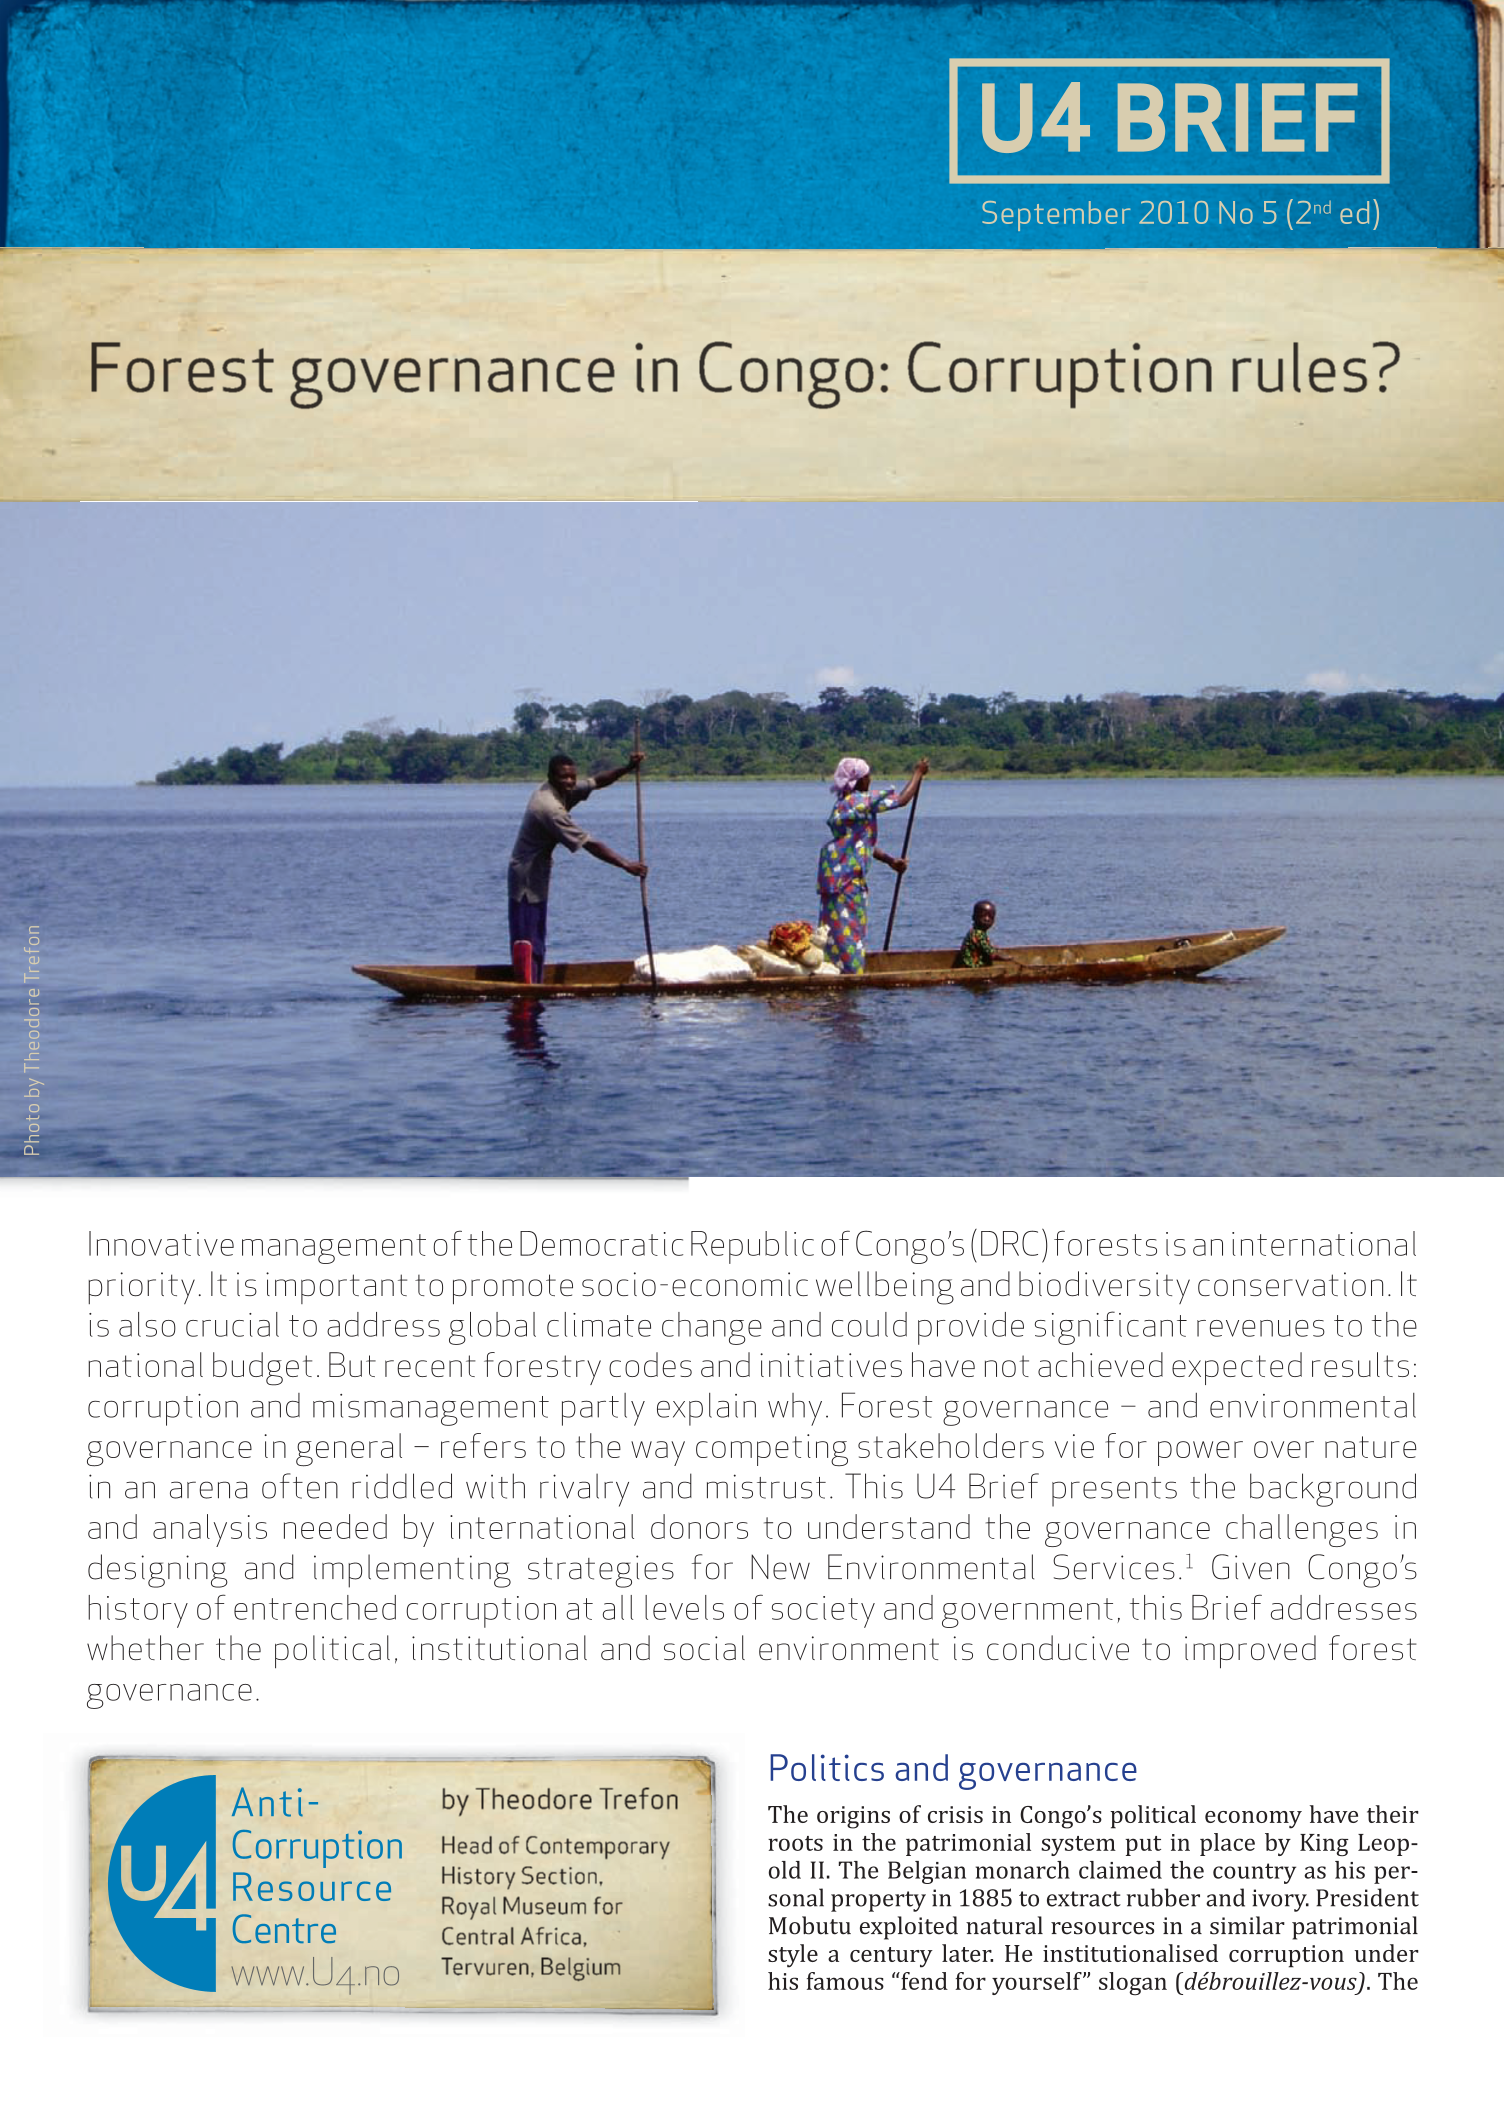 Forest governance in Congo: Corruption rules?